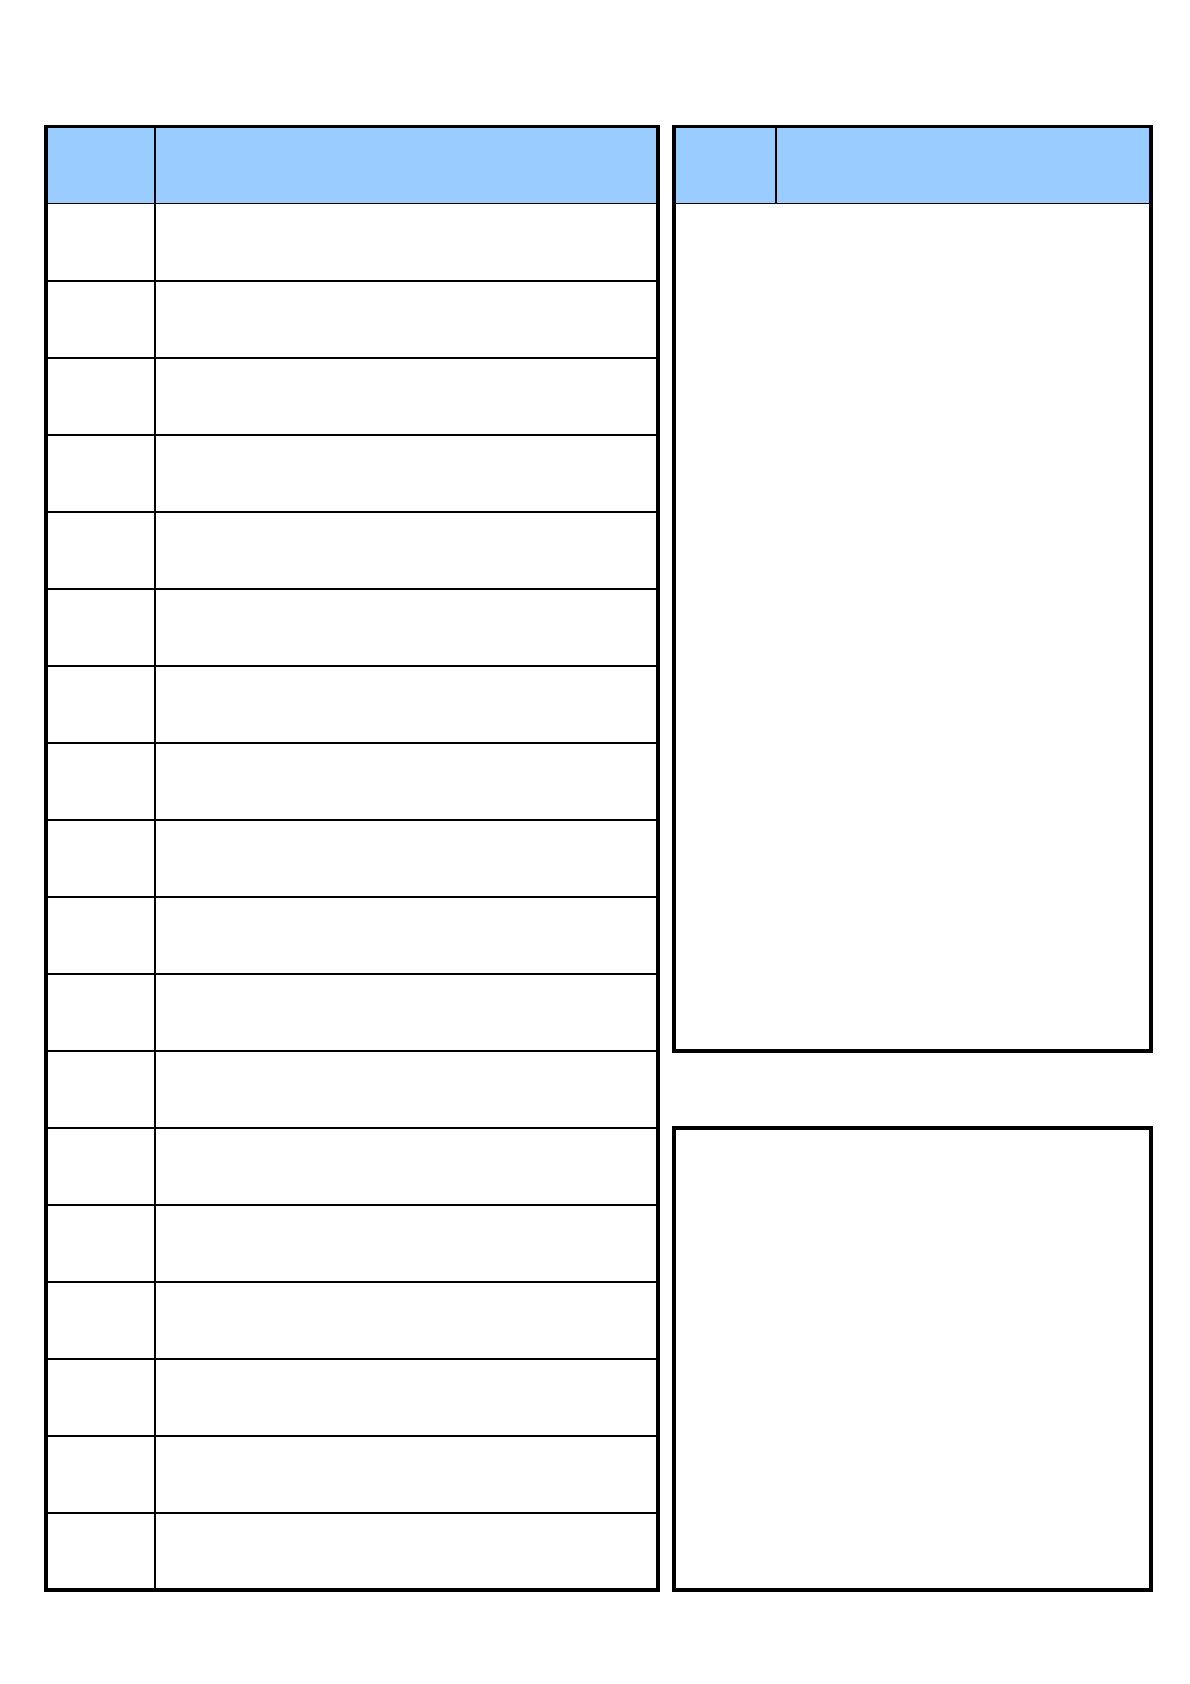 Daily Schedule Template New Blank - Edit, Fill, Sign Online  Handypdf With Regard To Printable Blank Daily Schedule Template